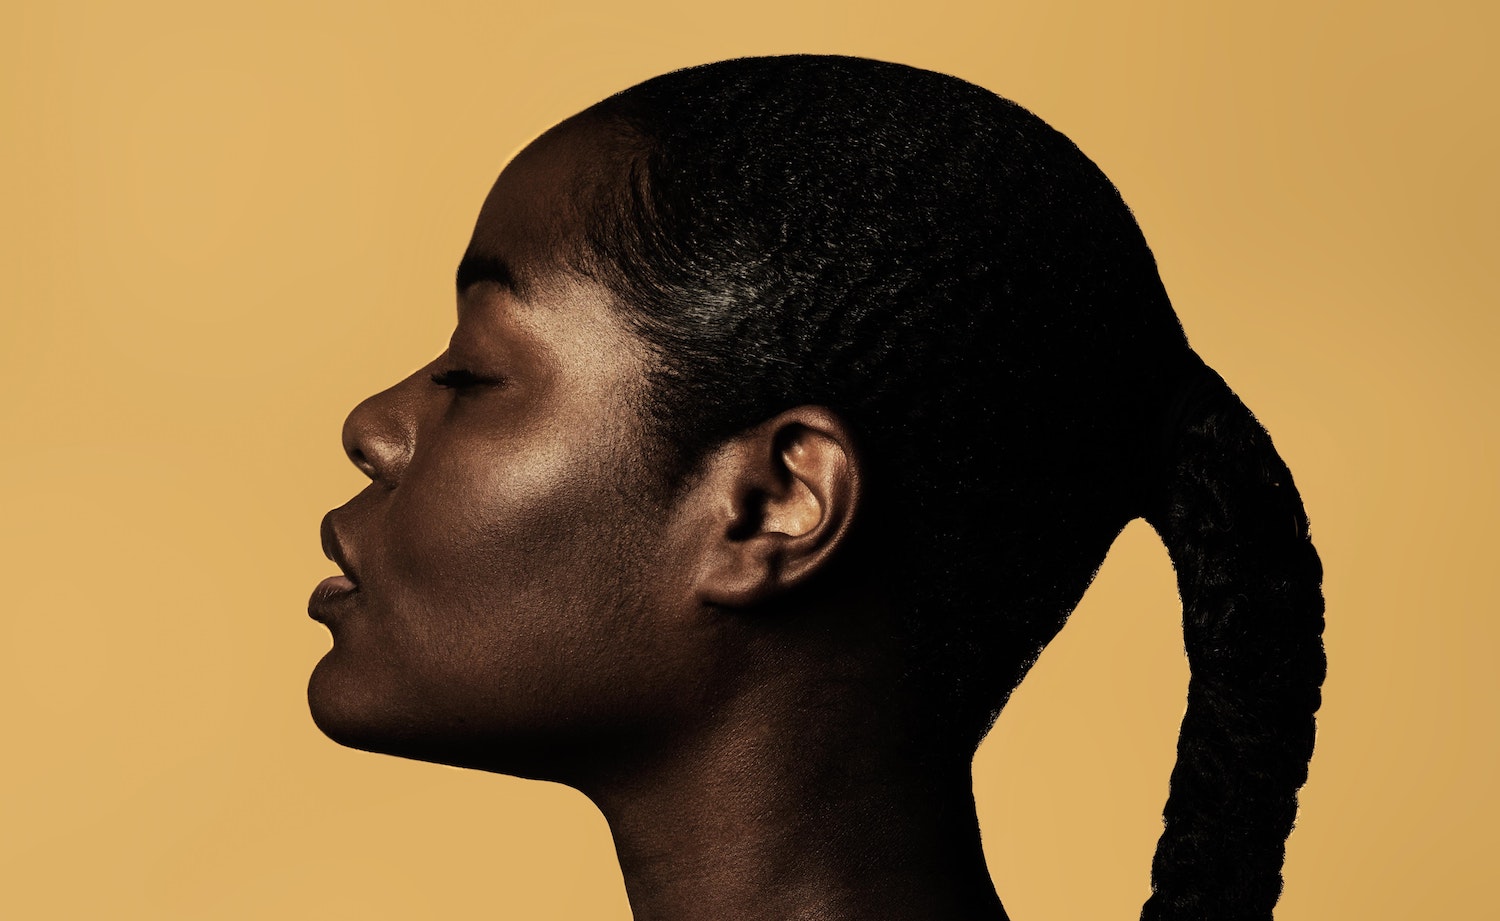 A strong, powerful Black woman in profile against a yellow background, with a sensitive expression on her face.